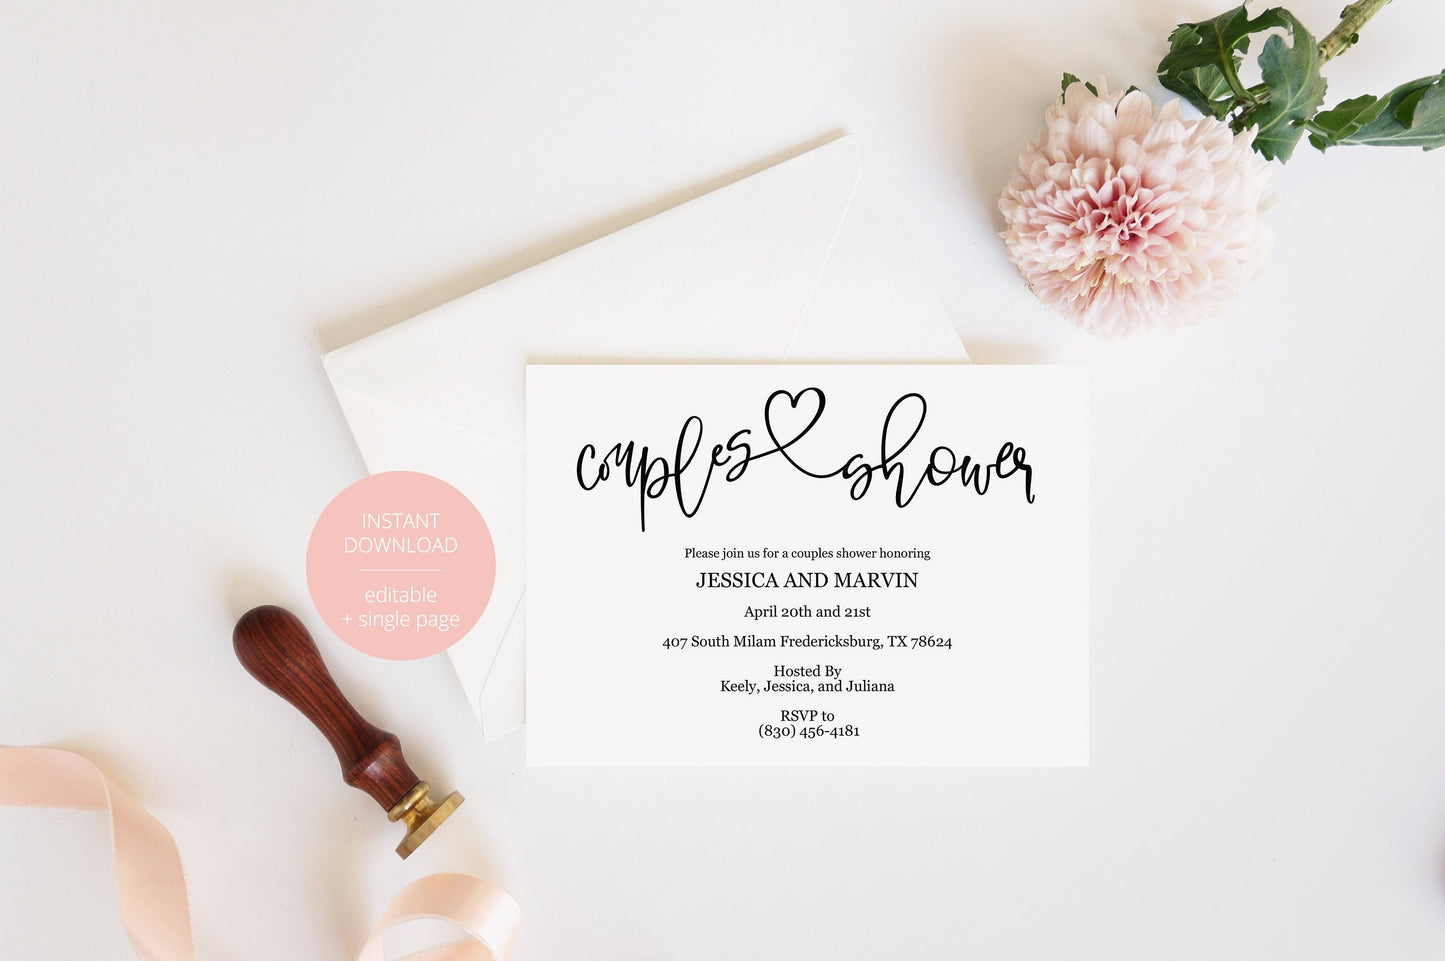 Rustic Couples Shower Invitation Instant Download Printable Editable Template DIY Bridal Shower Invite-JESSICA SHOWERS | BACHELORETTE SAVVY PAPER CO